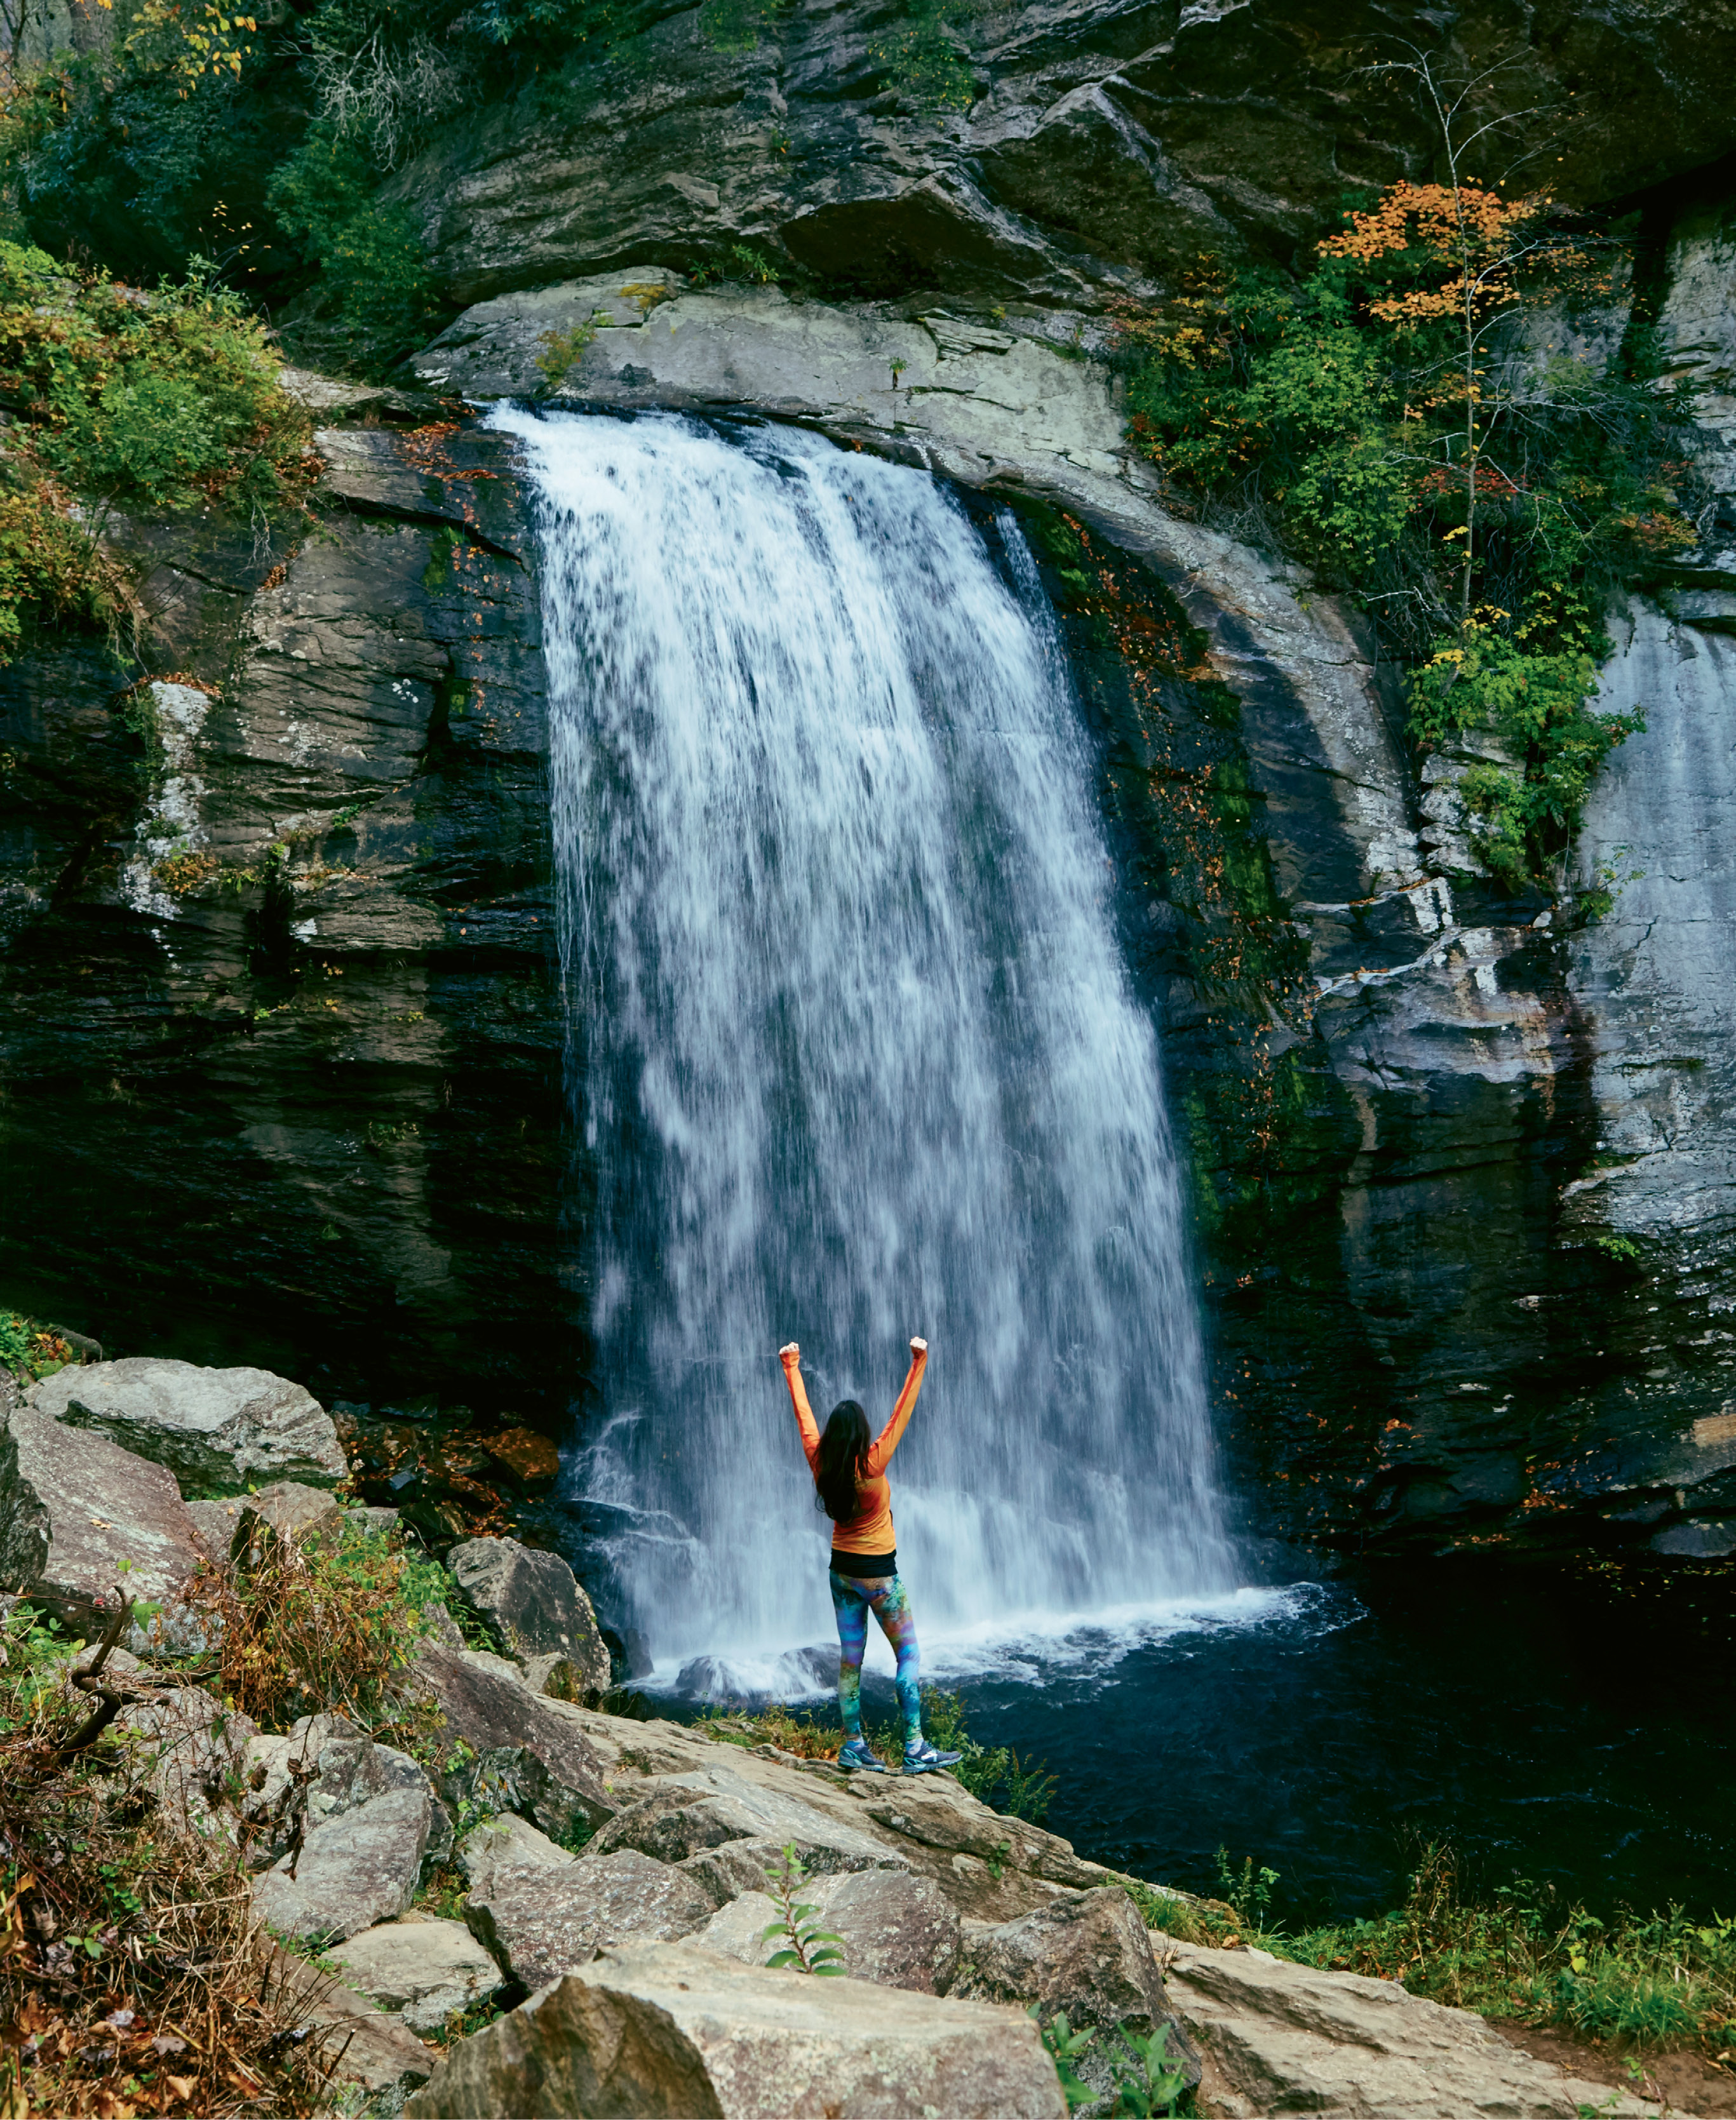 Pisgah’s Looking Glass Falls, one of 250 reasons Transylvania County is known as “Land of Waterfalls”